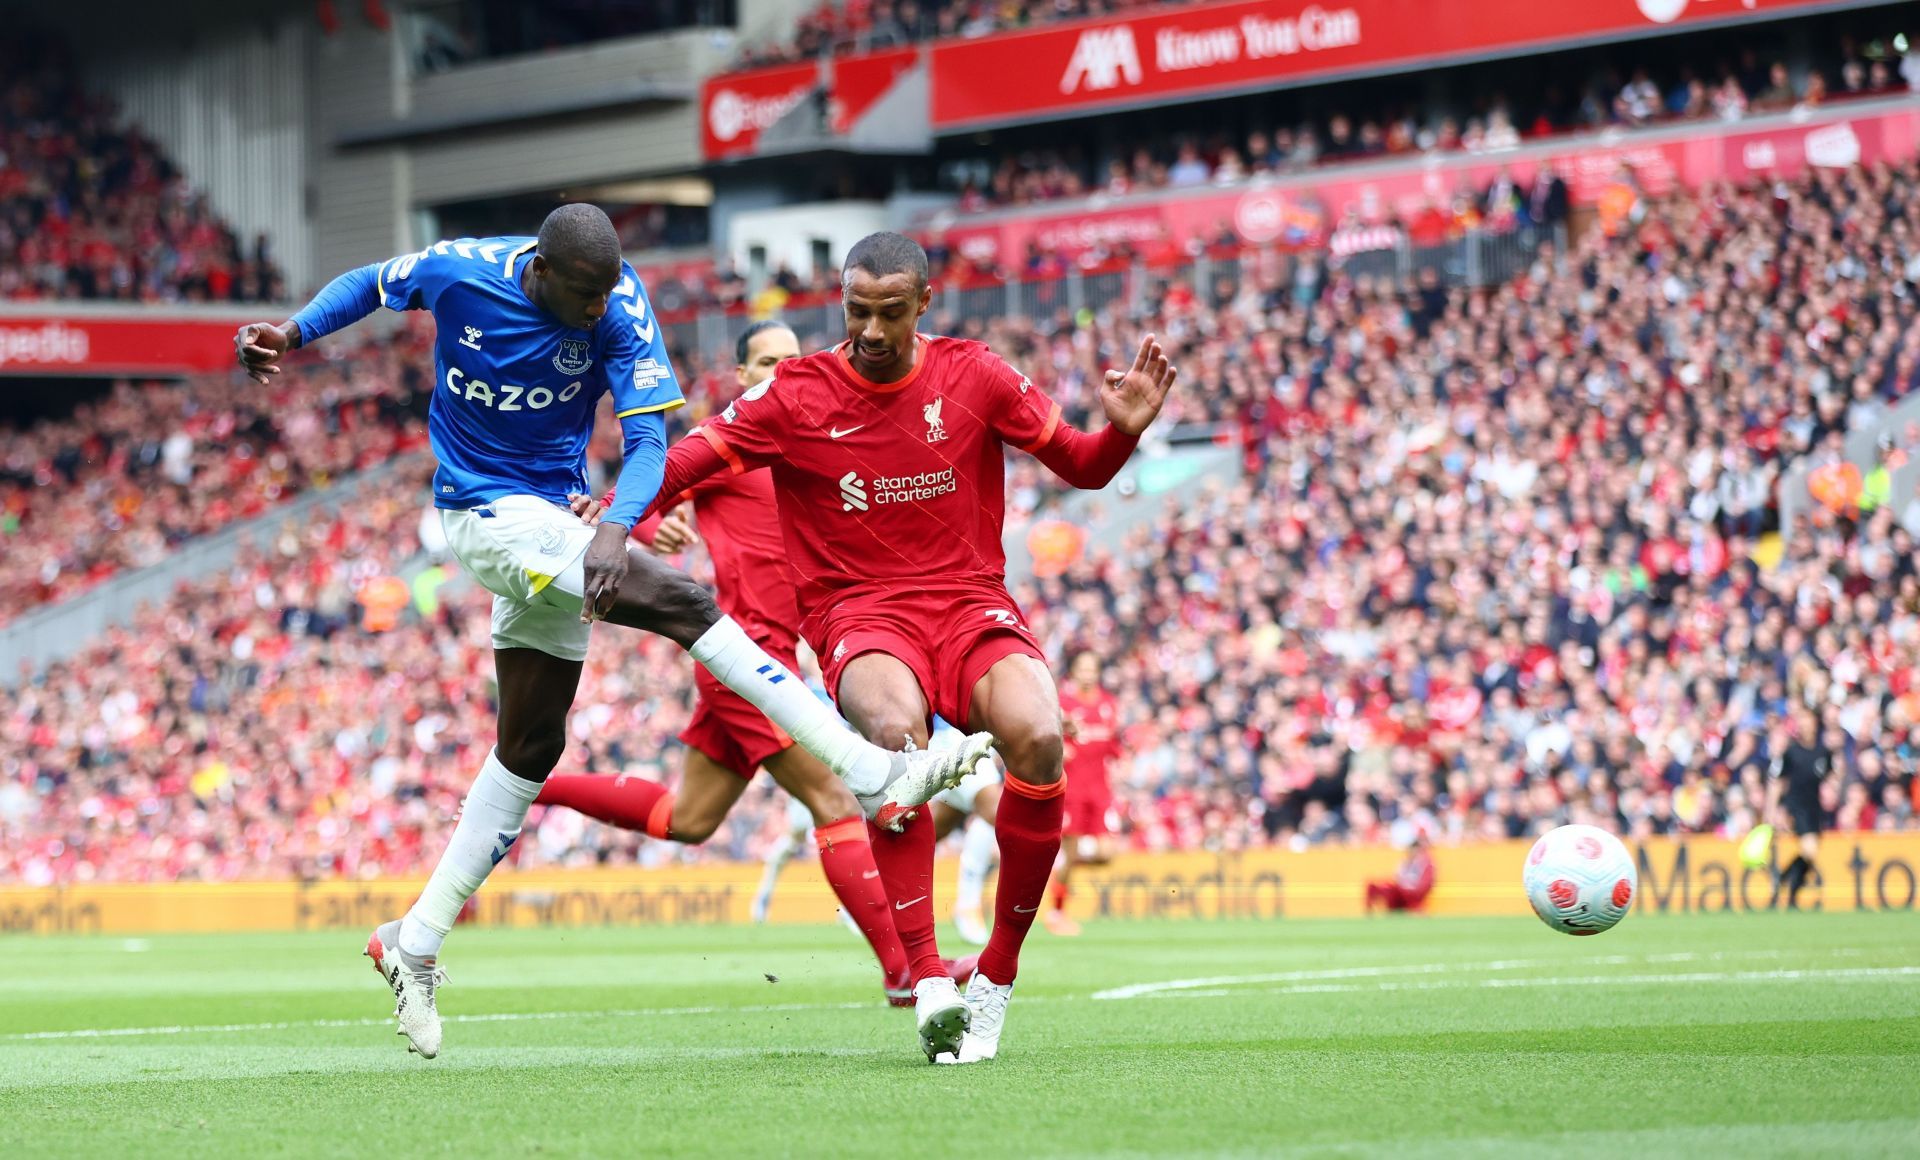 Joel Matip is expected to replace Ibrahima Konate in the starting lineup